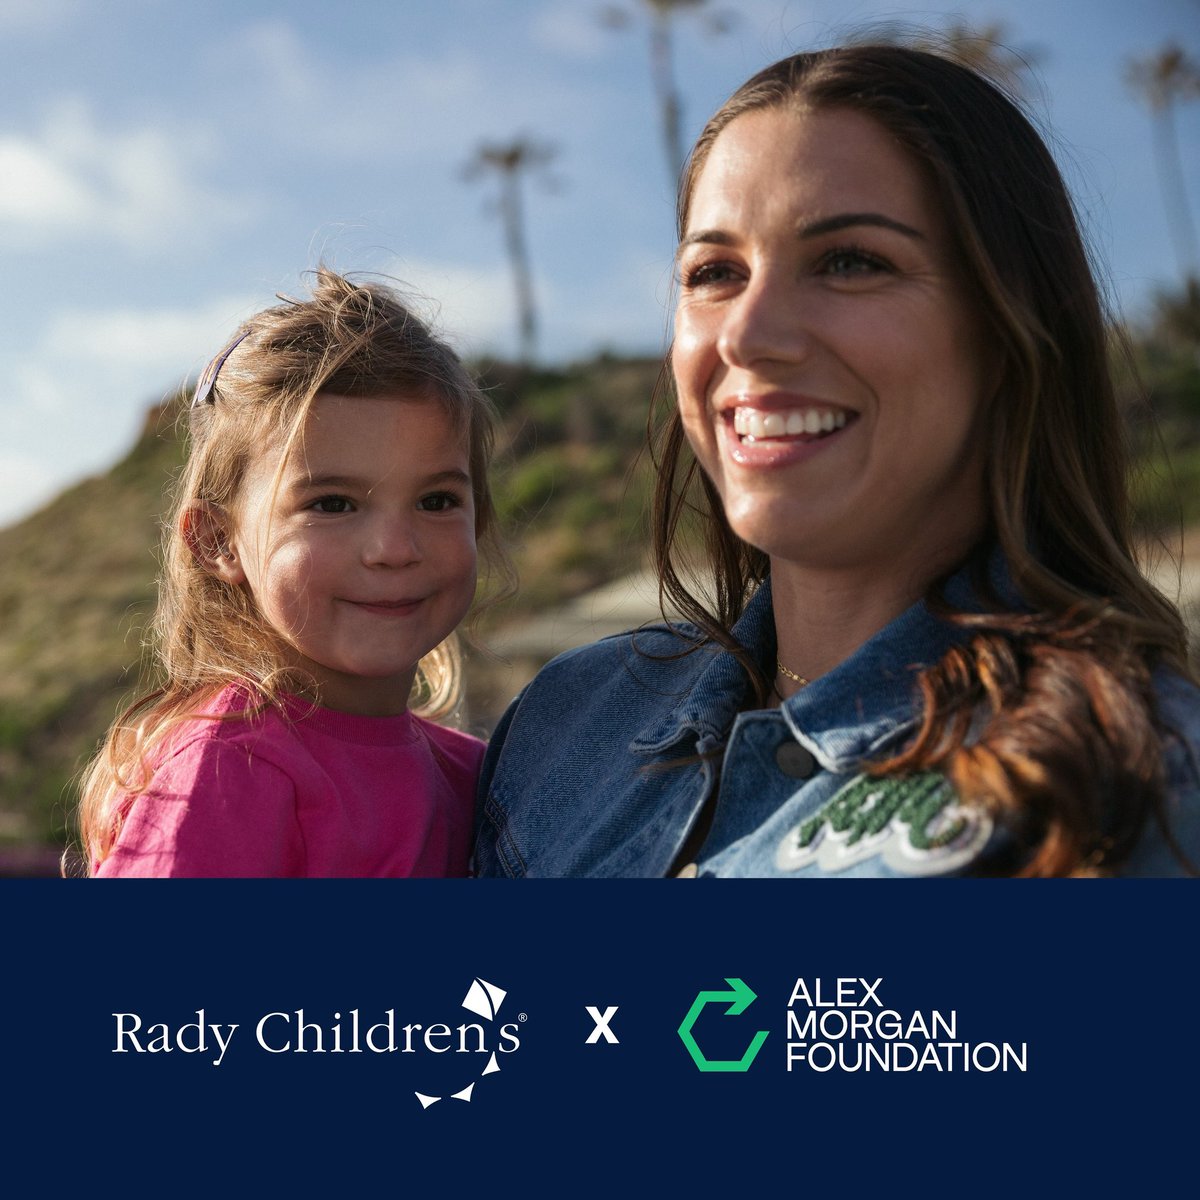 It takes a community. We’re proud to partner with @radychildrens to ensure that all kids in our region receive the best care and go on to find their confident paths forward in life!